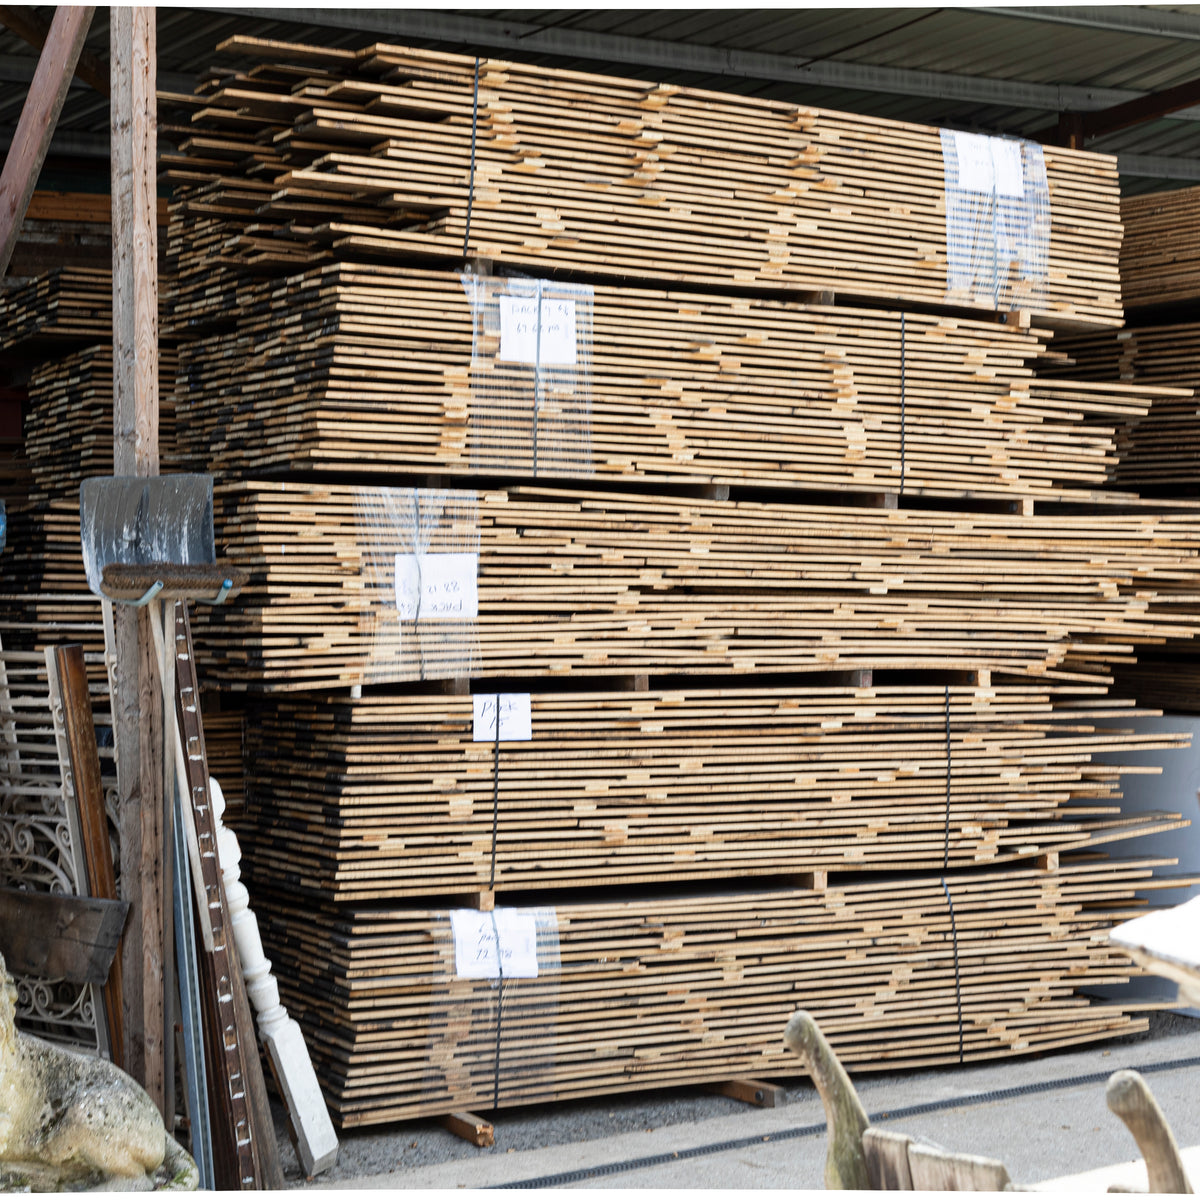 Antique Pine Wooden Panels for Cladding or Flooring 1360 m2 Available | The Architectural Forum